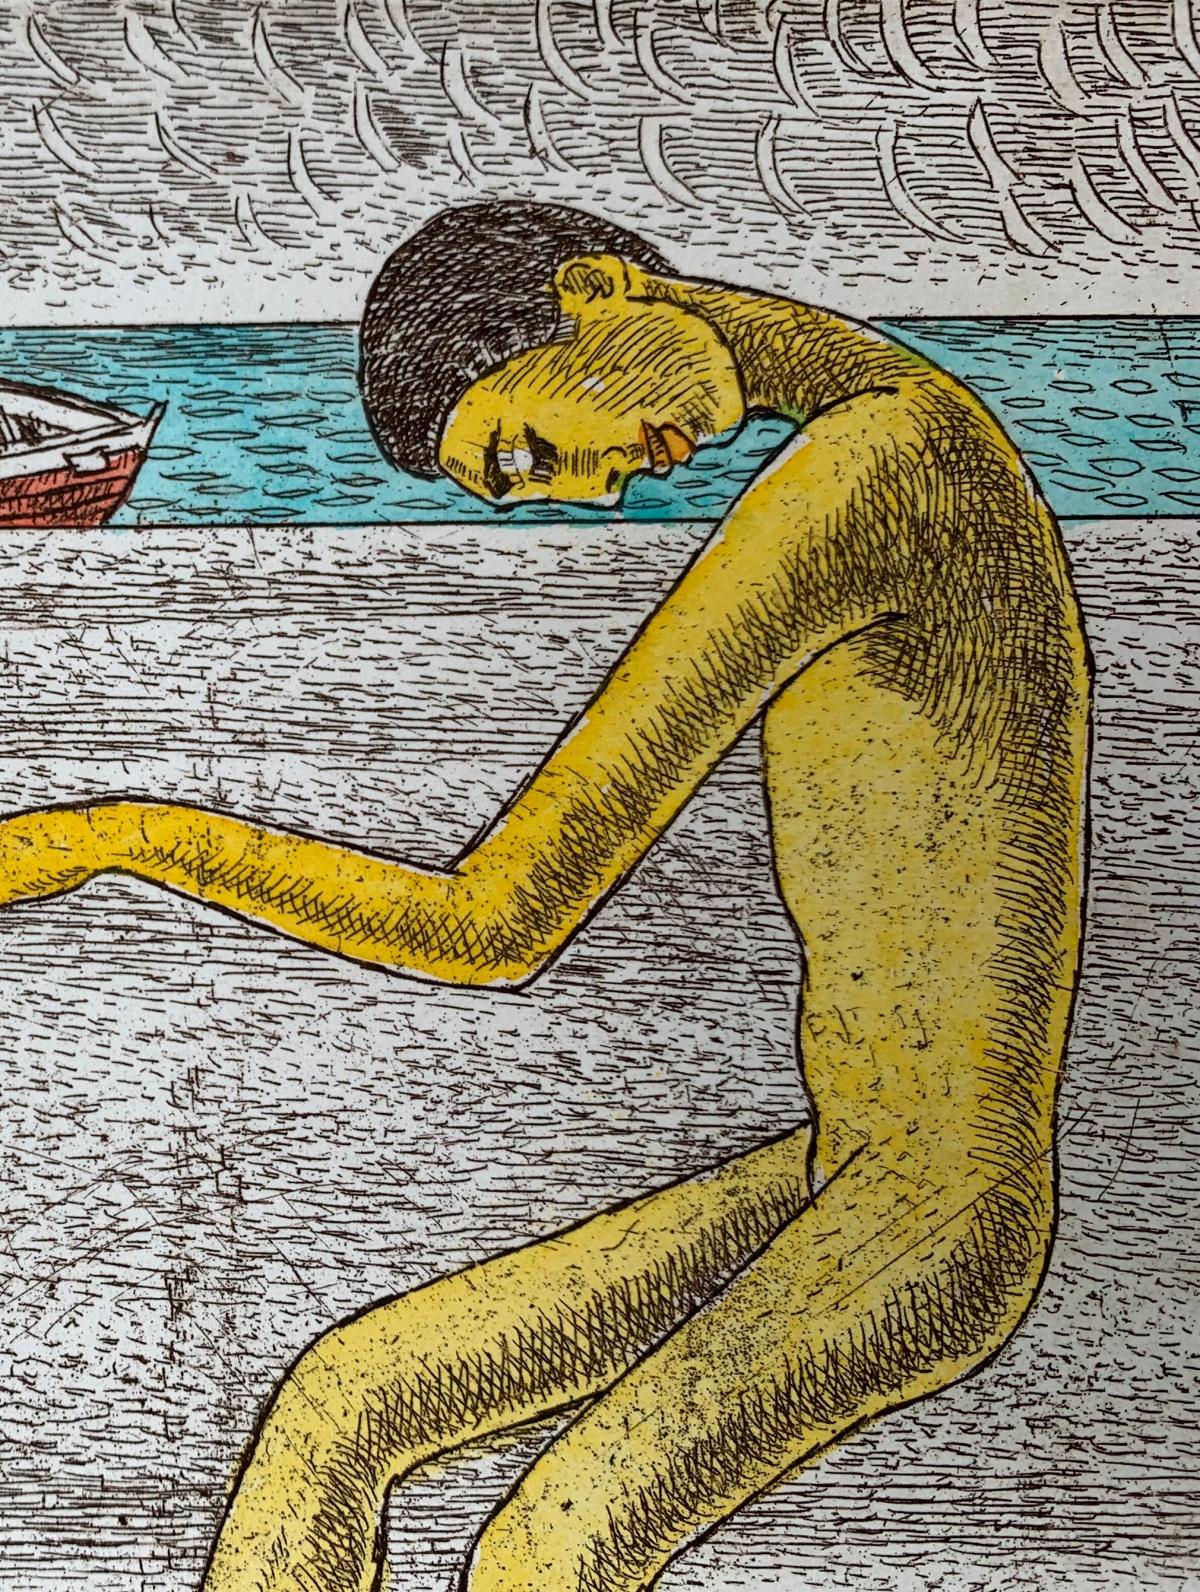 A proposal - Contemporary Figurative Etching Print, Nude, Colorful - Brown Nude Print by Czeslaw Tumielewicz